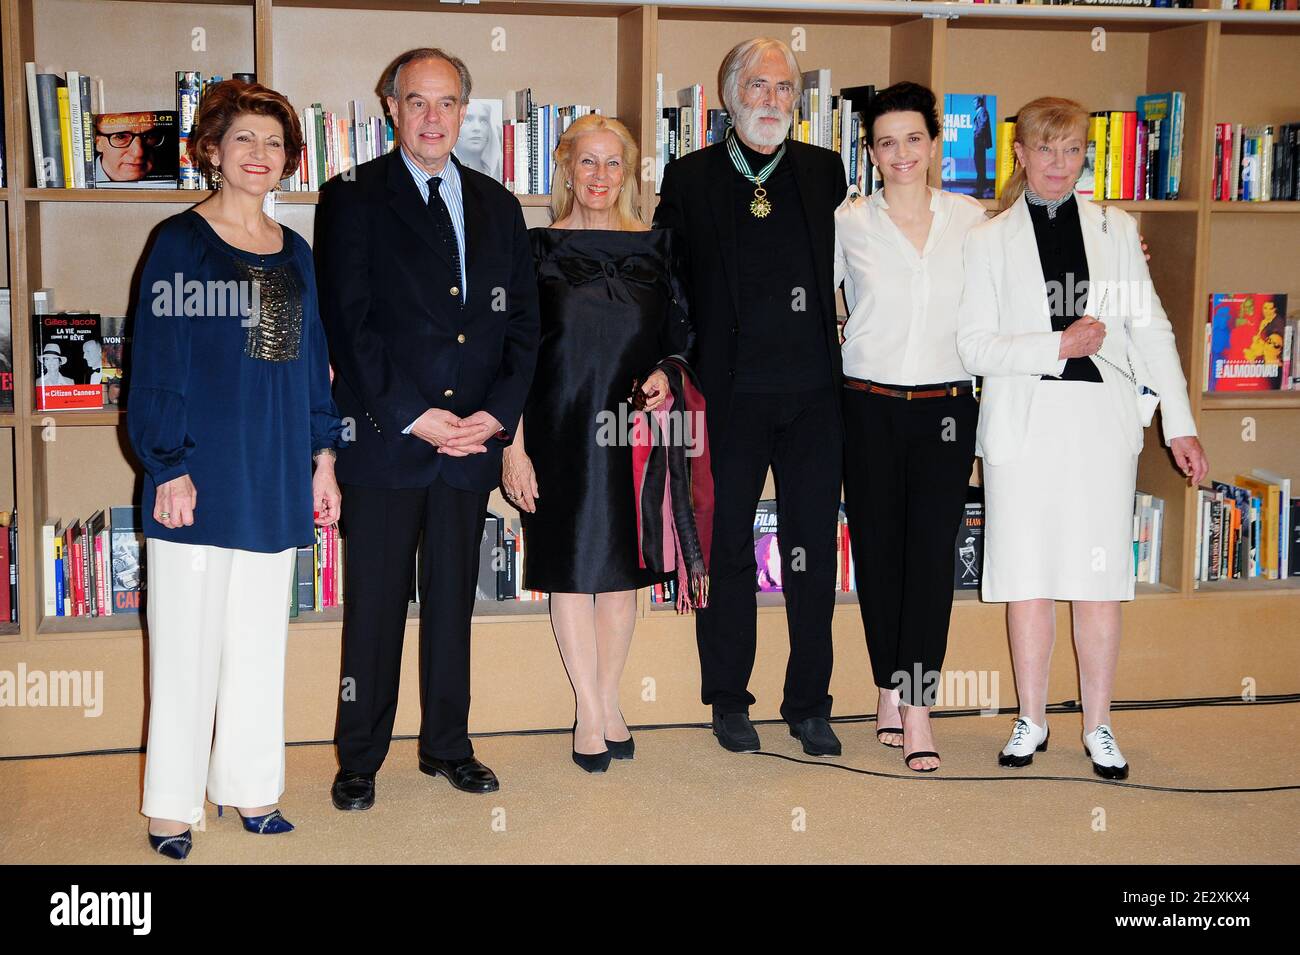 Austrian writer and director Michael Haneke poses with Juliette Binoche, Gilles Jacob, Thierry Fremaux and Androulla Vassiliou and French Culture Minister Frederic Mitterrand as he is awarded the Commander in the Order of Arts and Literature at the Palais des Festivals during the 63rd Annual Cannes Film Festival in Cannes, France on May 16, 2010. Photo by Nicolas Briquet/ABACAPRESS.COM Stock Photo